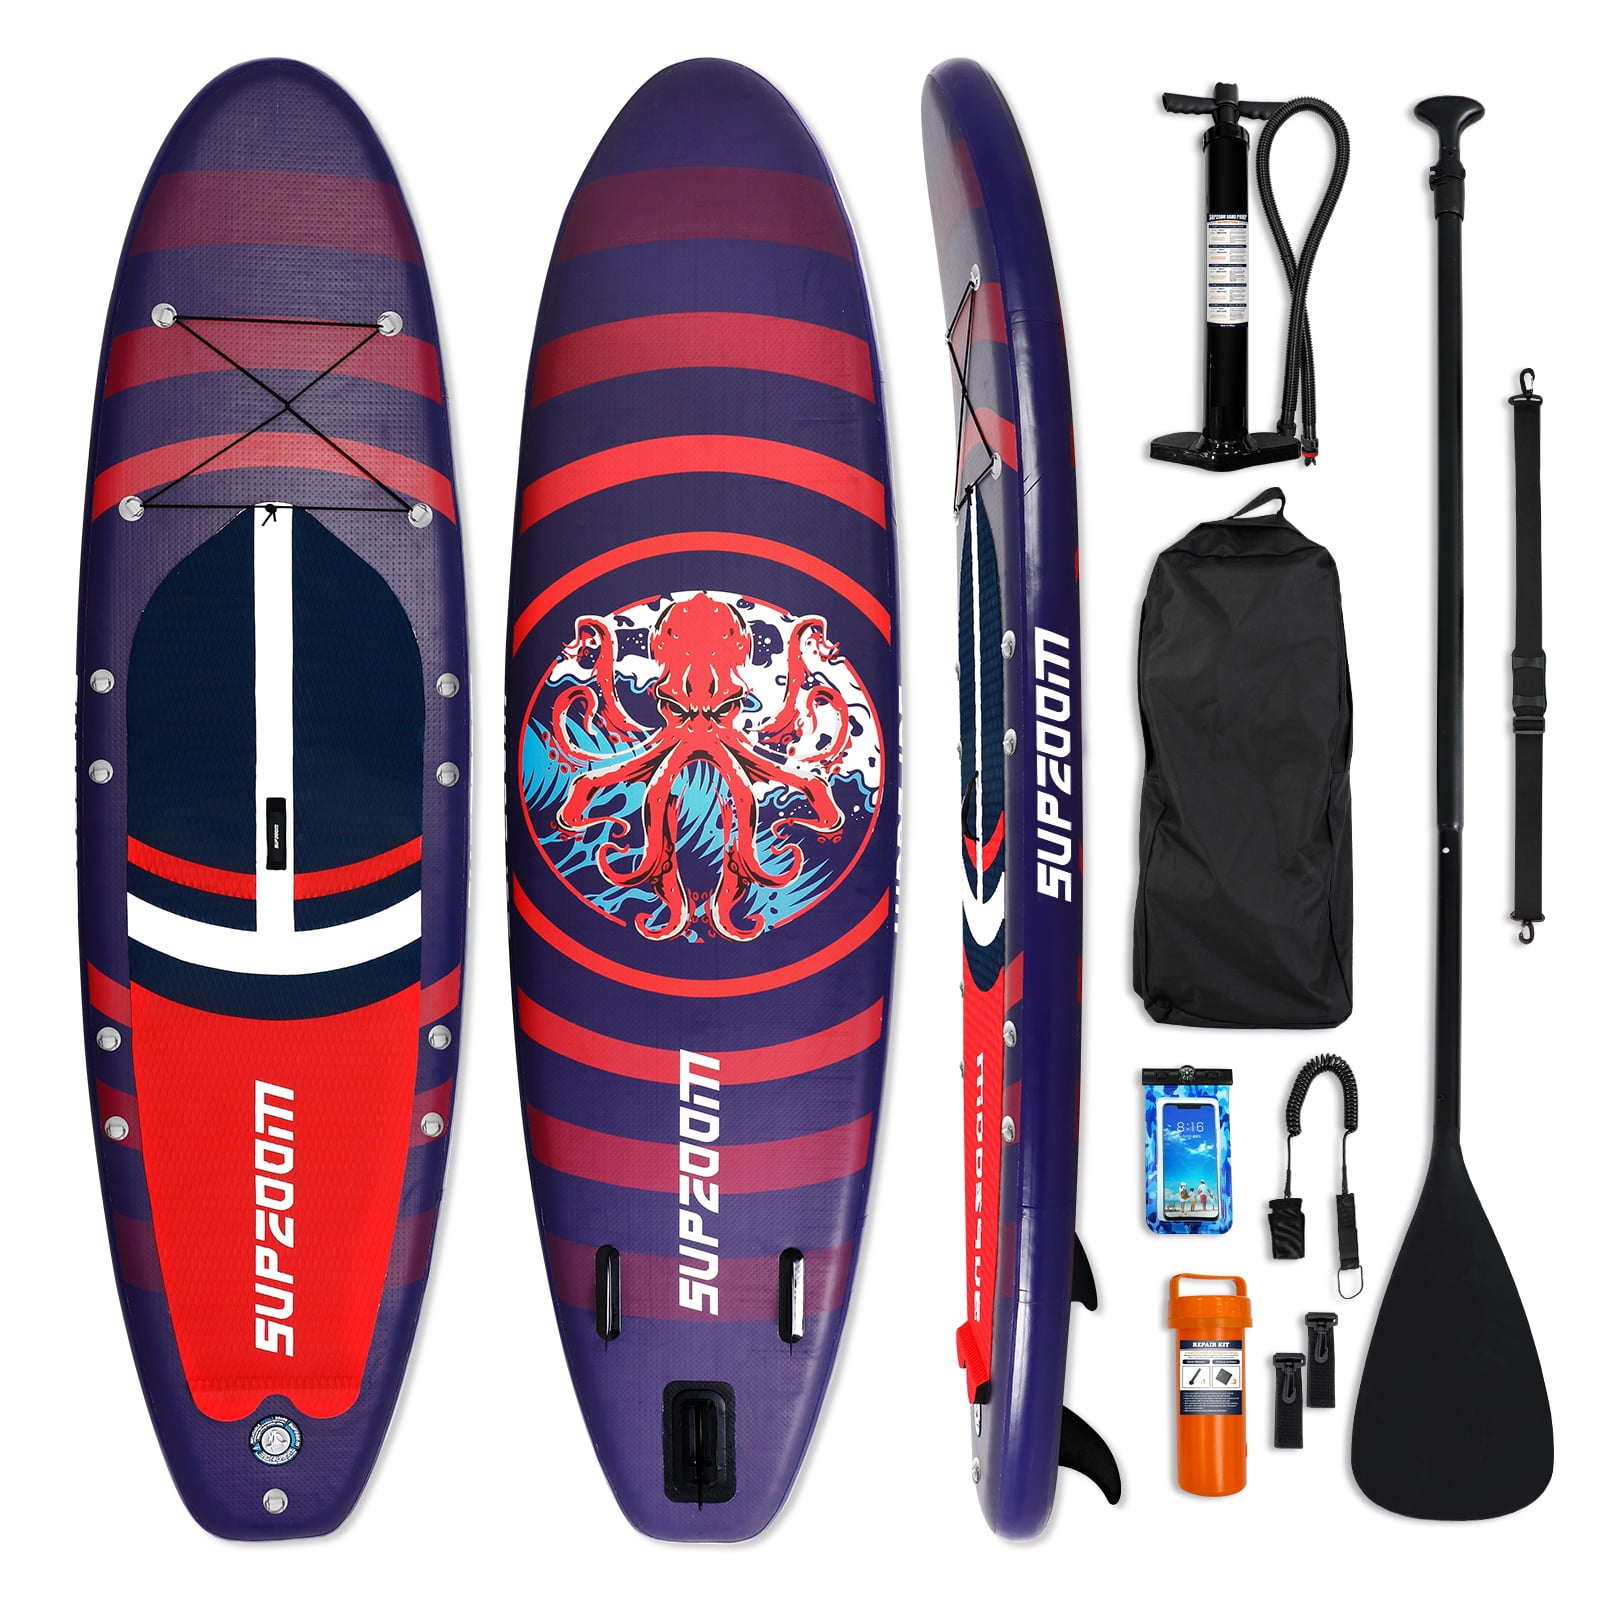 Details about   SUP stand up paddle board inflatable surfing surfboard kit paddleboard 305-320cm 